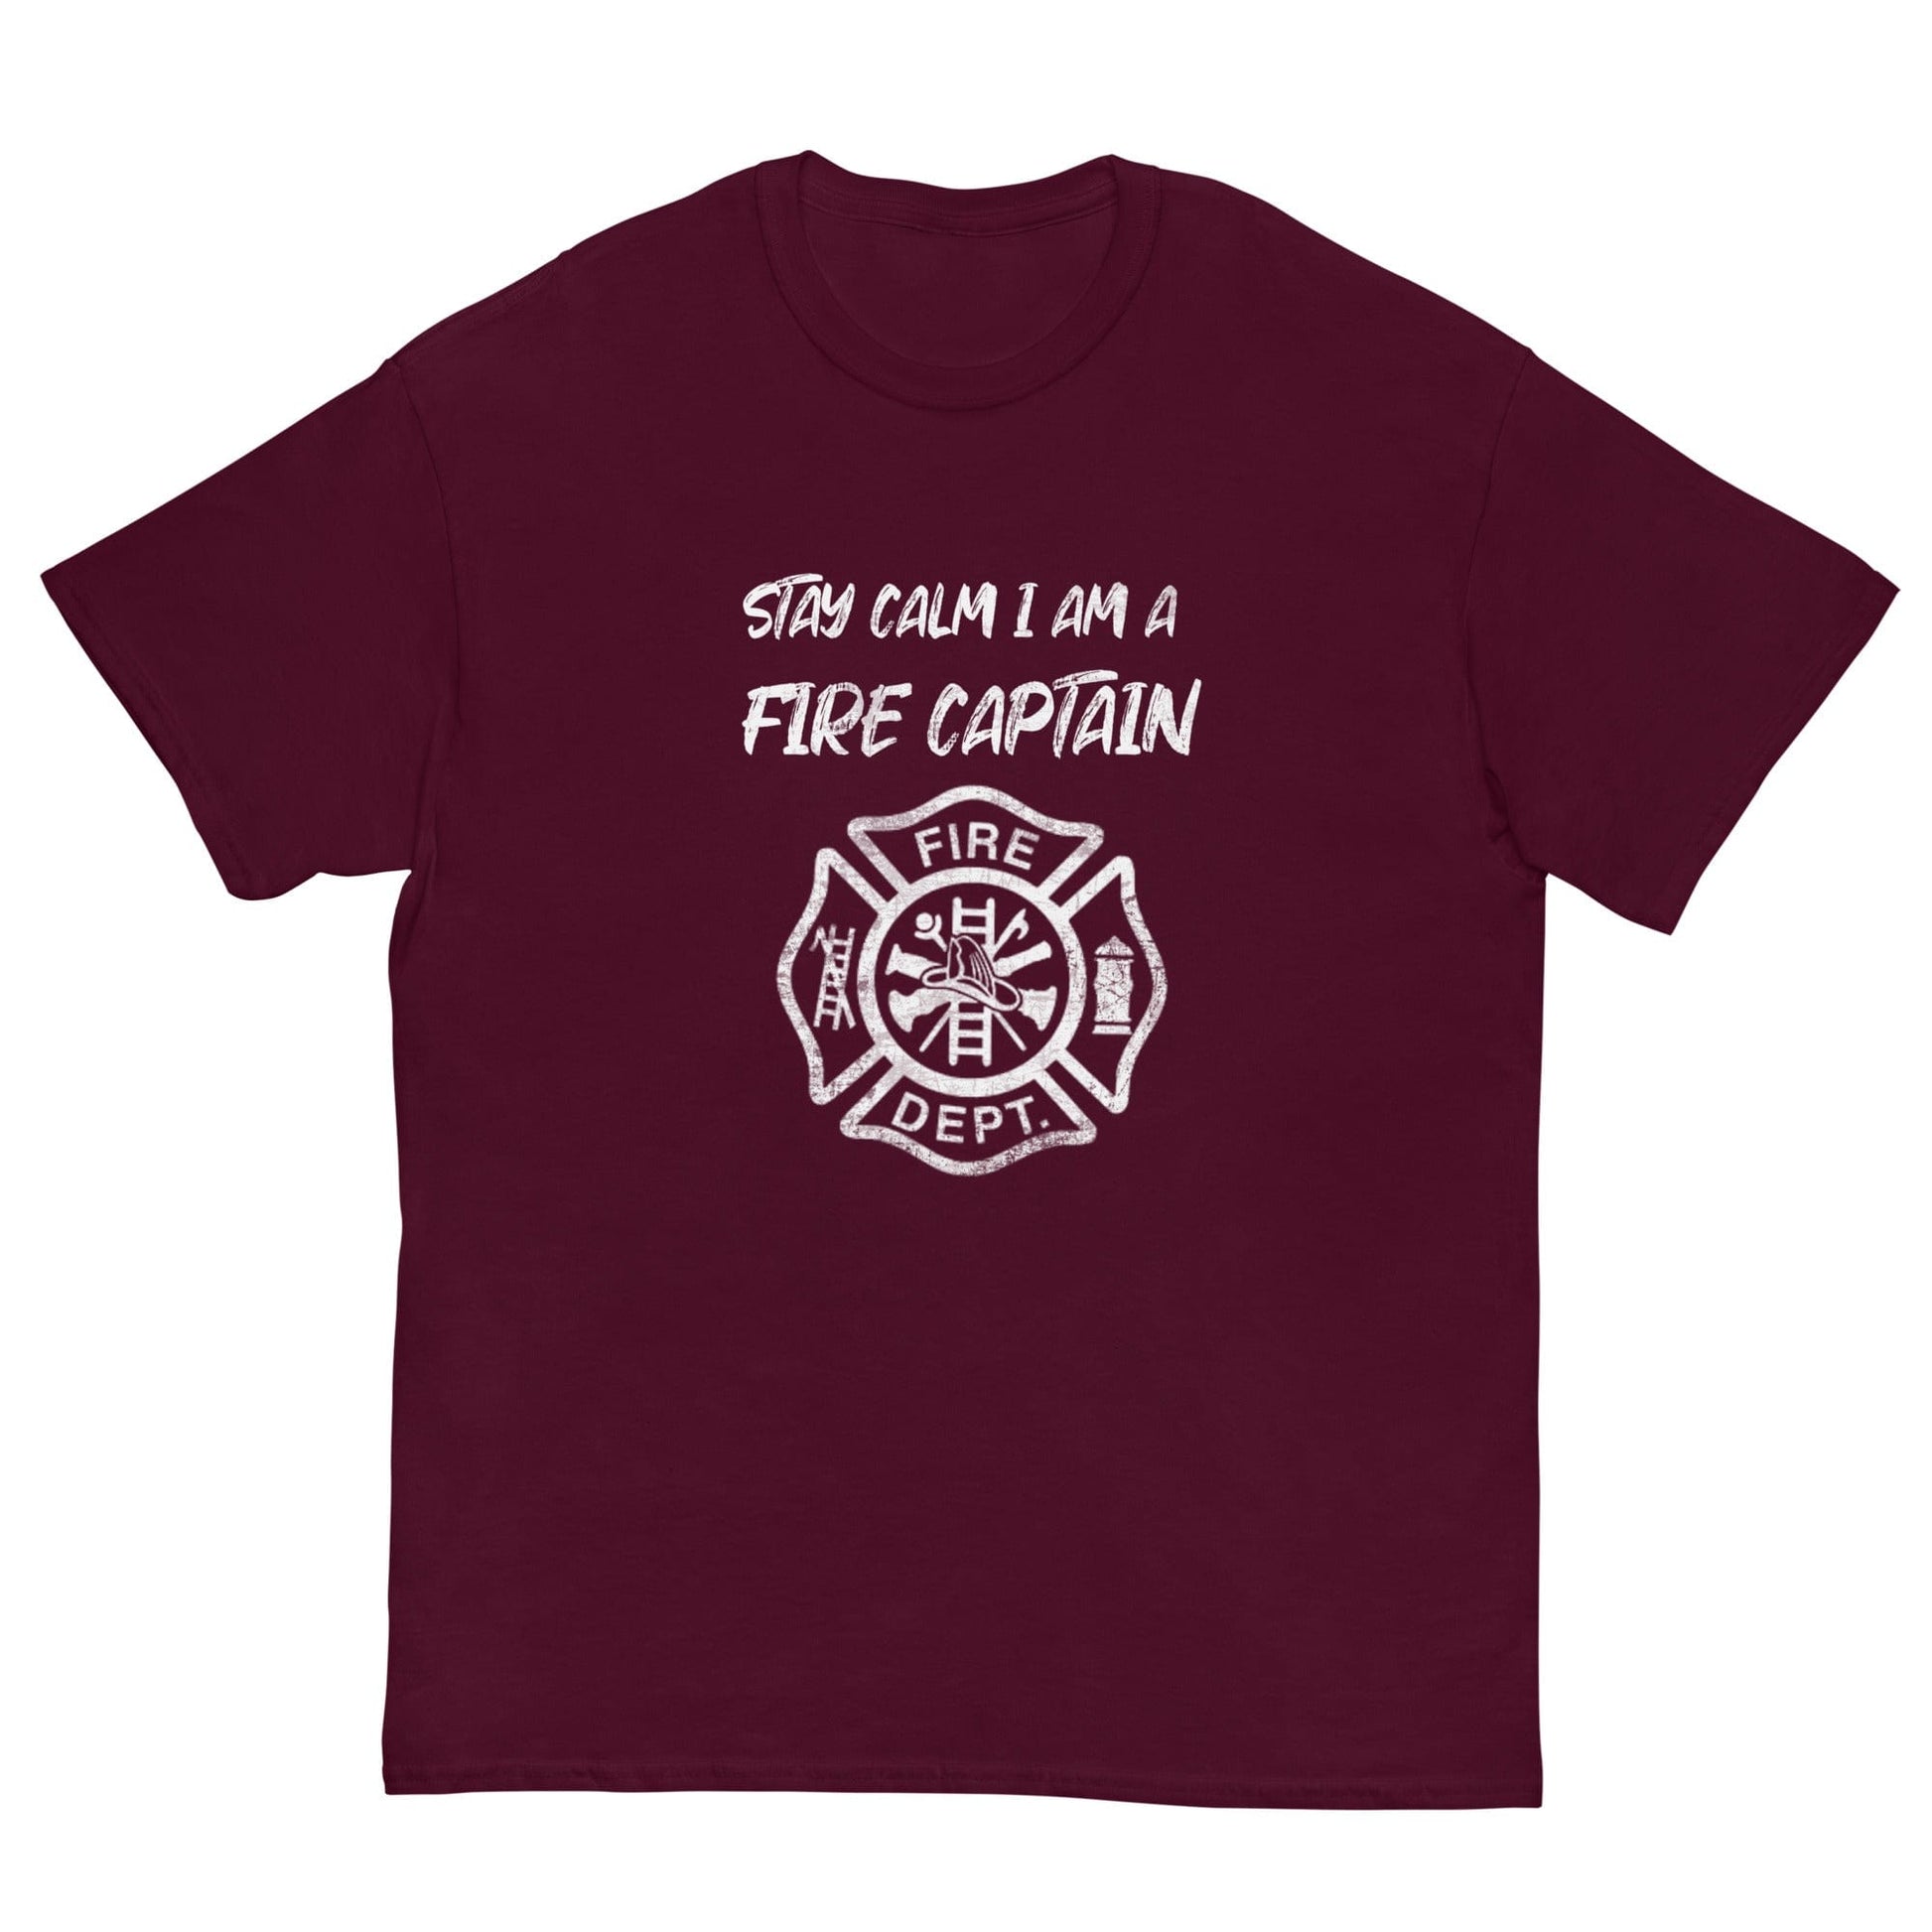 Stay Calm Fire Captain T-shirt Maroon / S